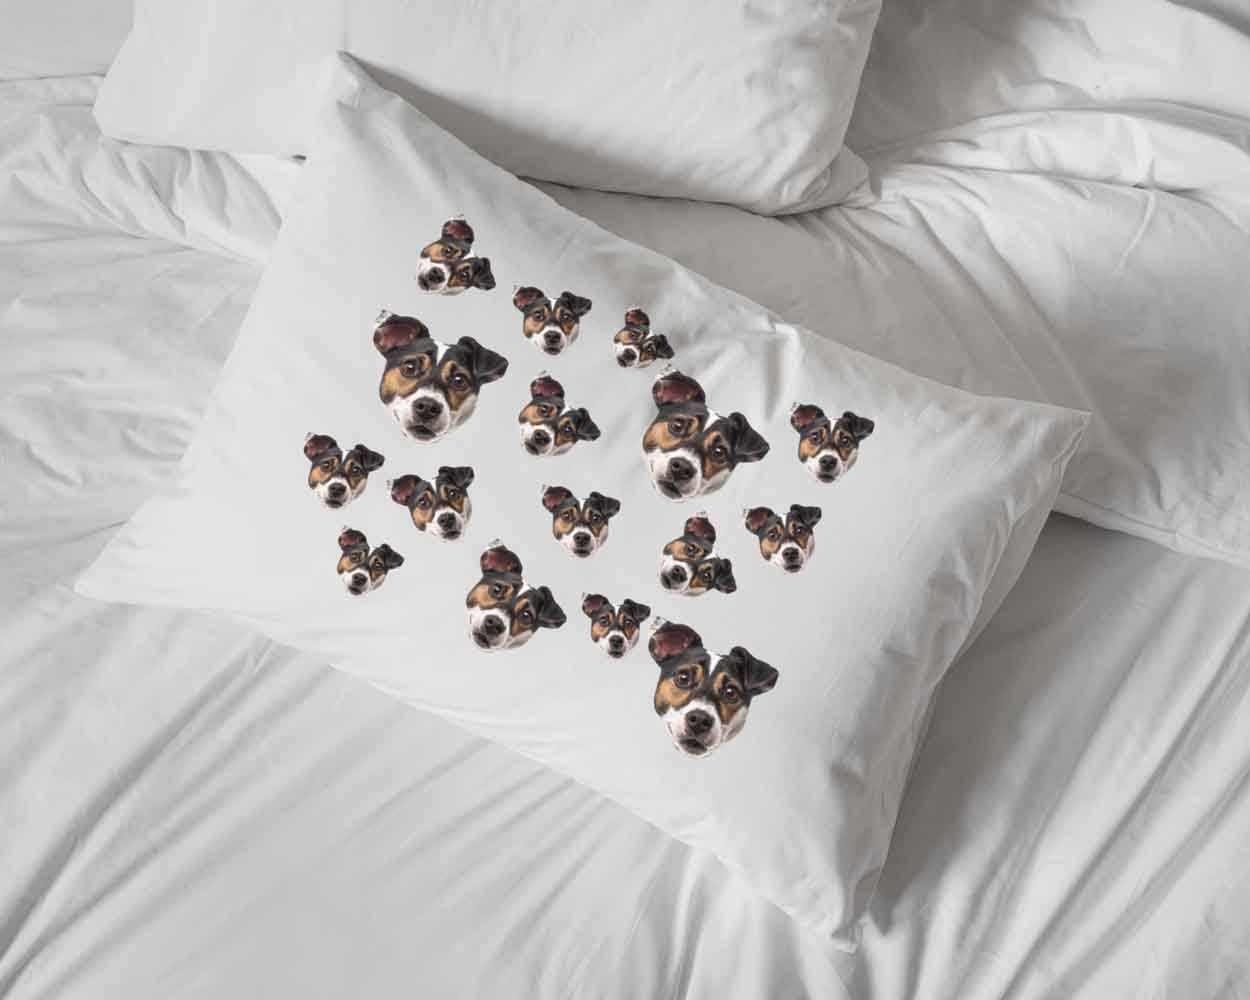 Custom printed white cotton pillowcase with your pet photo face cropped in all over design digitally printed on pillowcase makes a fun gift for someone special.